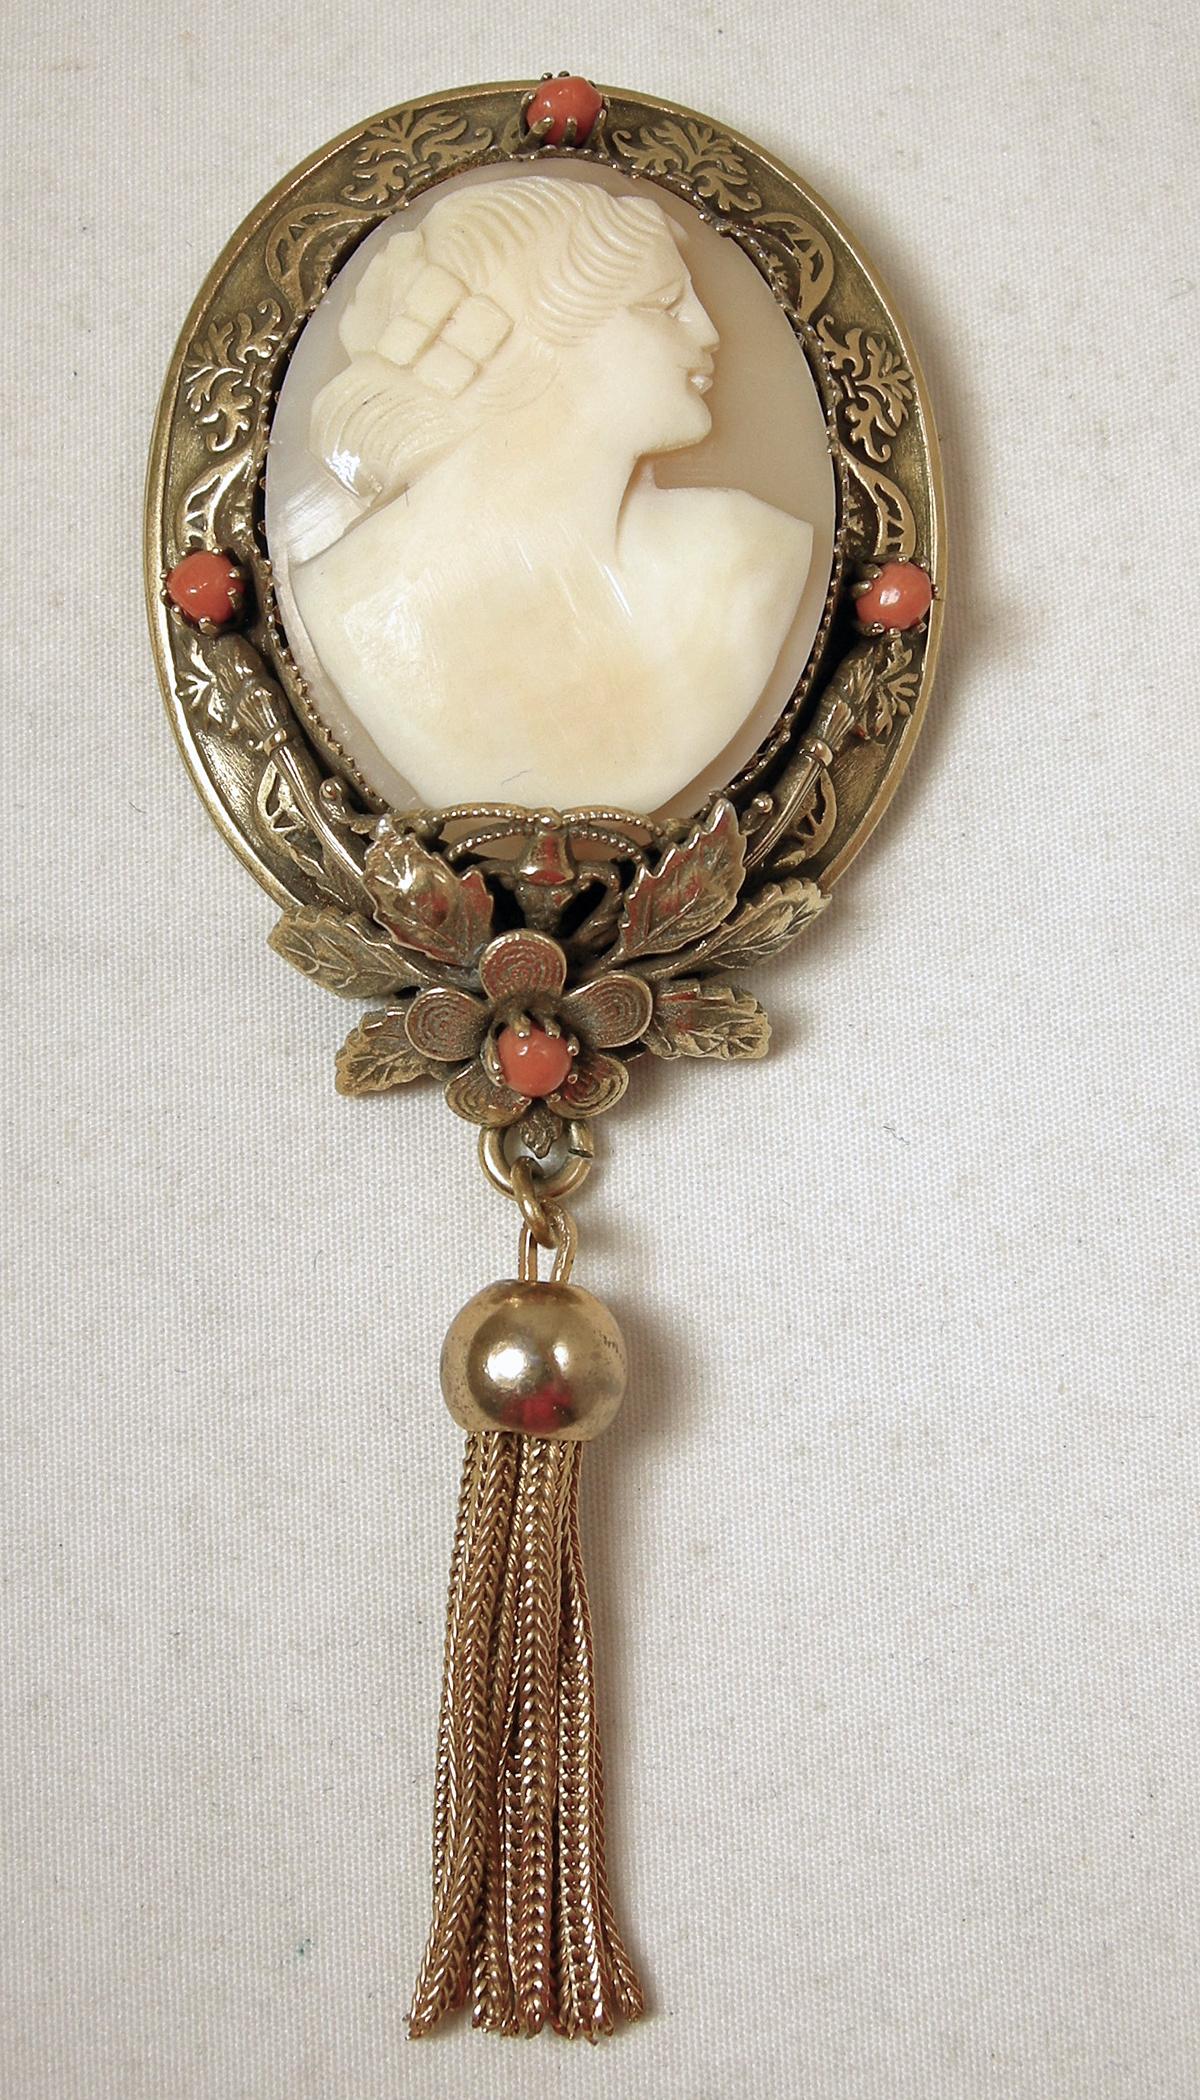 This vintage Victorian revival brooch can also be worn as a pendant. The brooch has a faux cameo center with faux coral accents on its gold tone border.  The brooch has tassels hanging downward. The brooch is 4” x 1-1/2” and the matching clip